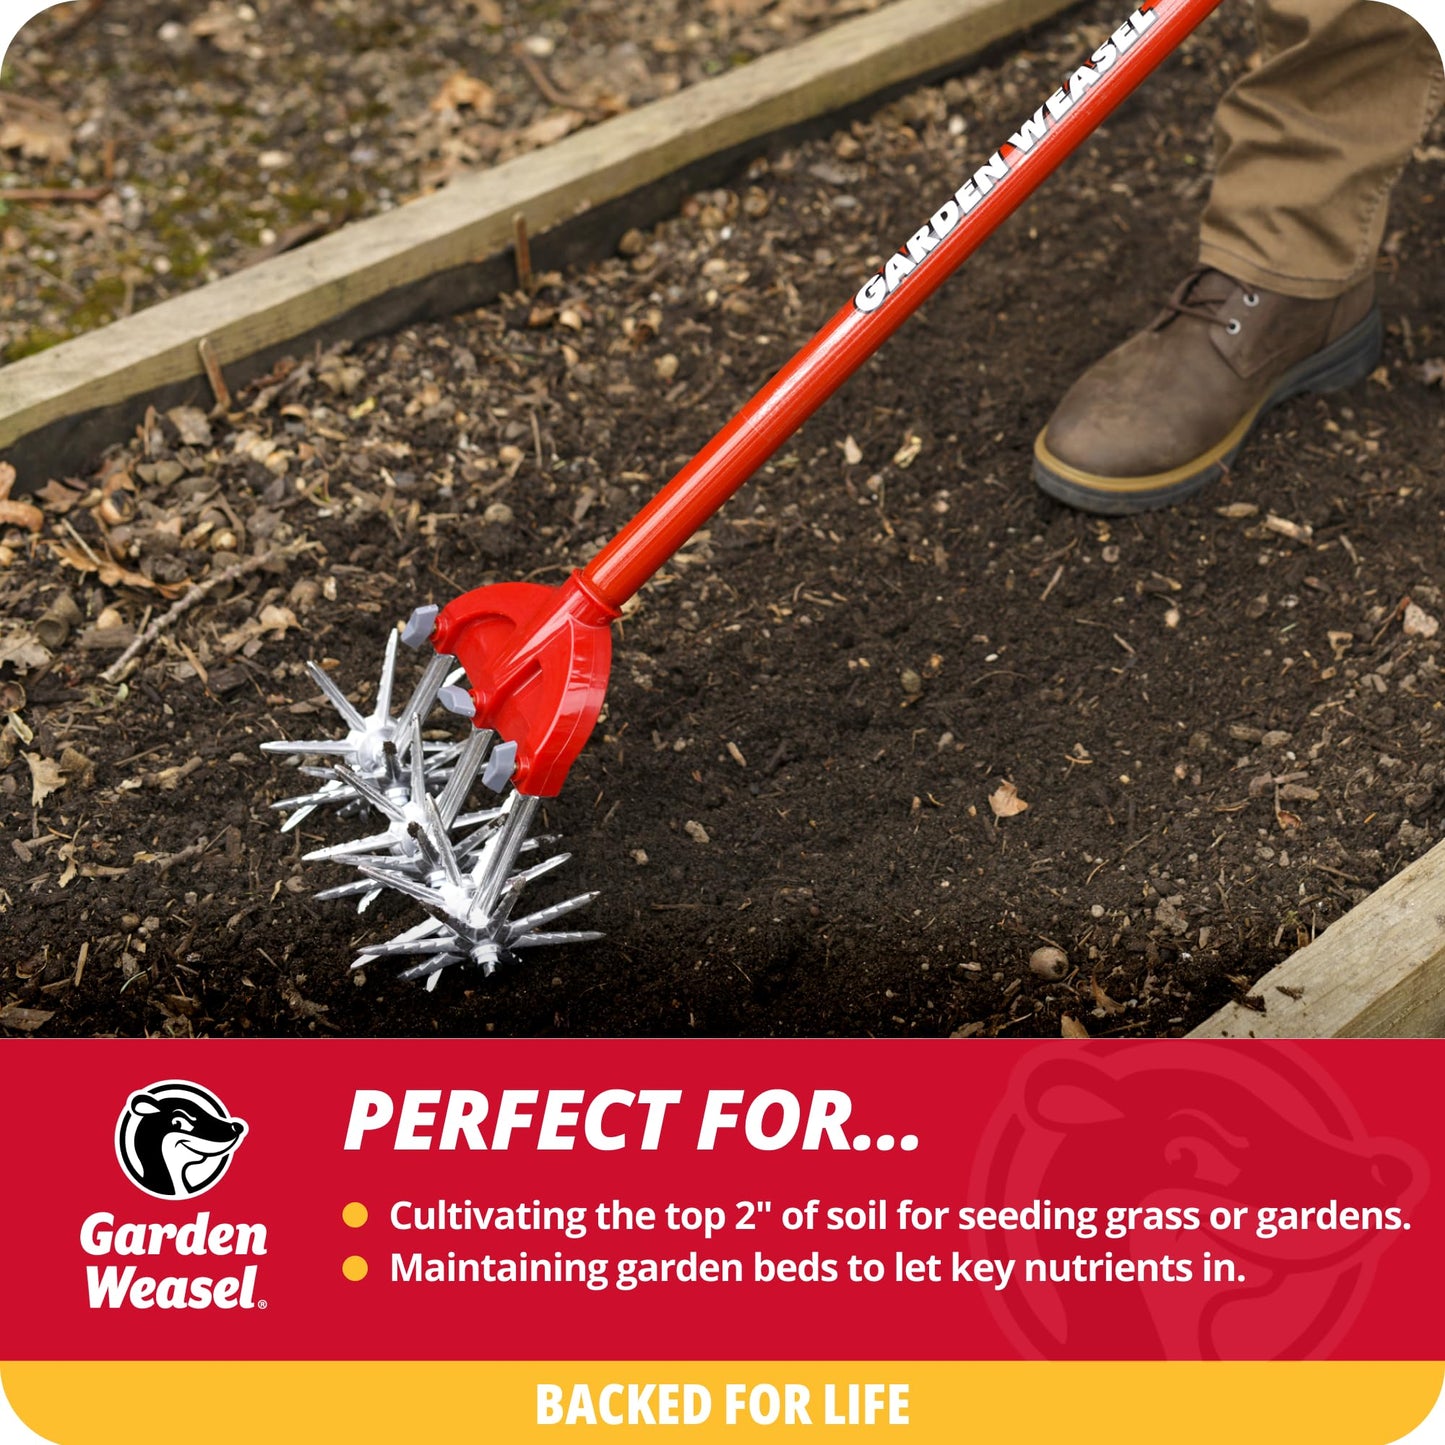 Garden Weasel Rotary Cultivator with Detachable Tines - Long Handle | Aerate, Weed, Cultivate, Plant, Reseed | Lawn Reseeding Garden Tool, Garden Soil Loosener | 90206